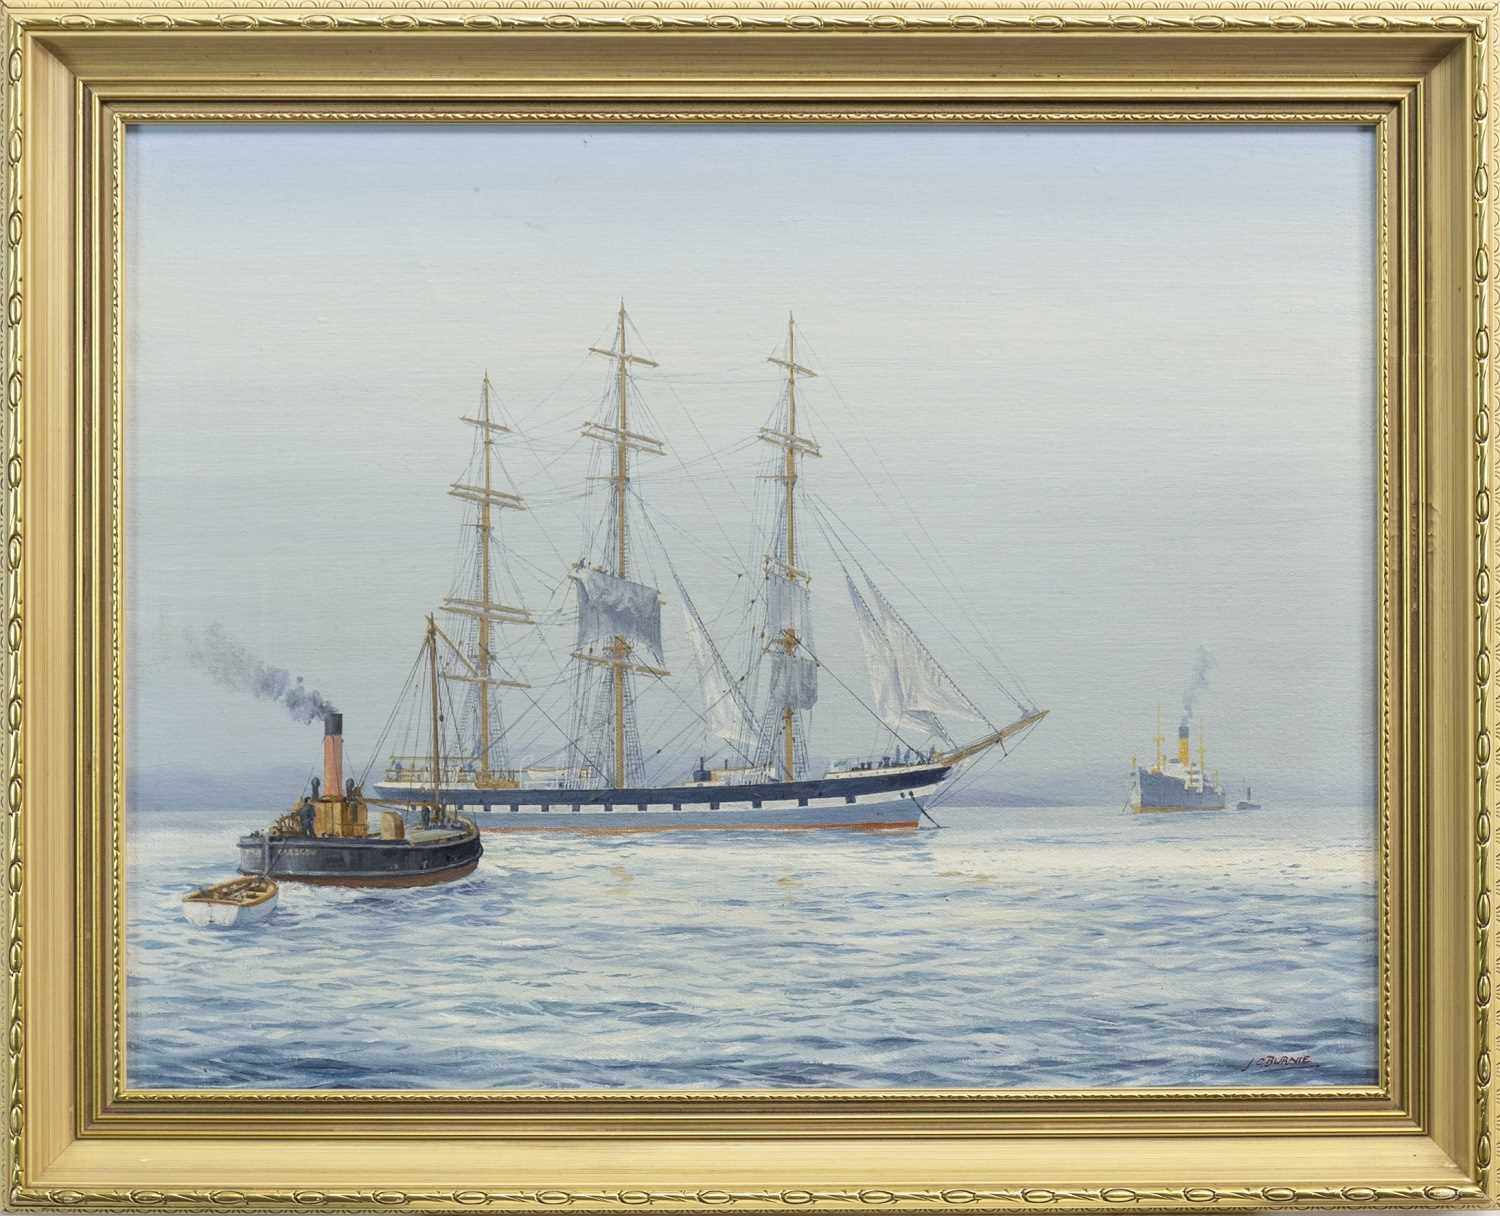 Lot 635 - BOATS IN CALM WATERS, AN OIL BY JAMES BURNIE